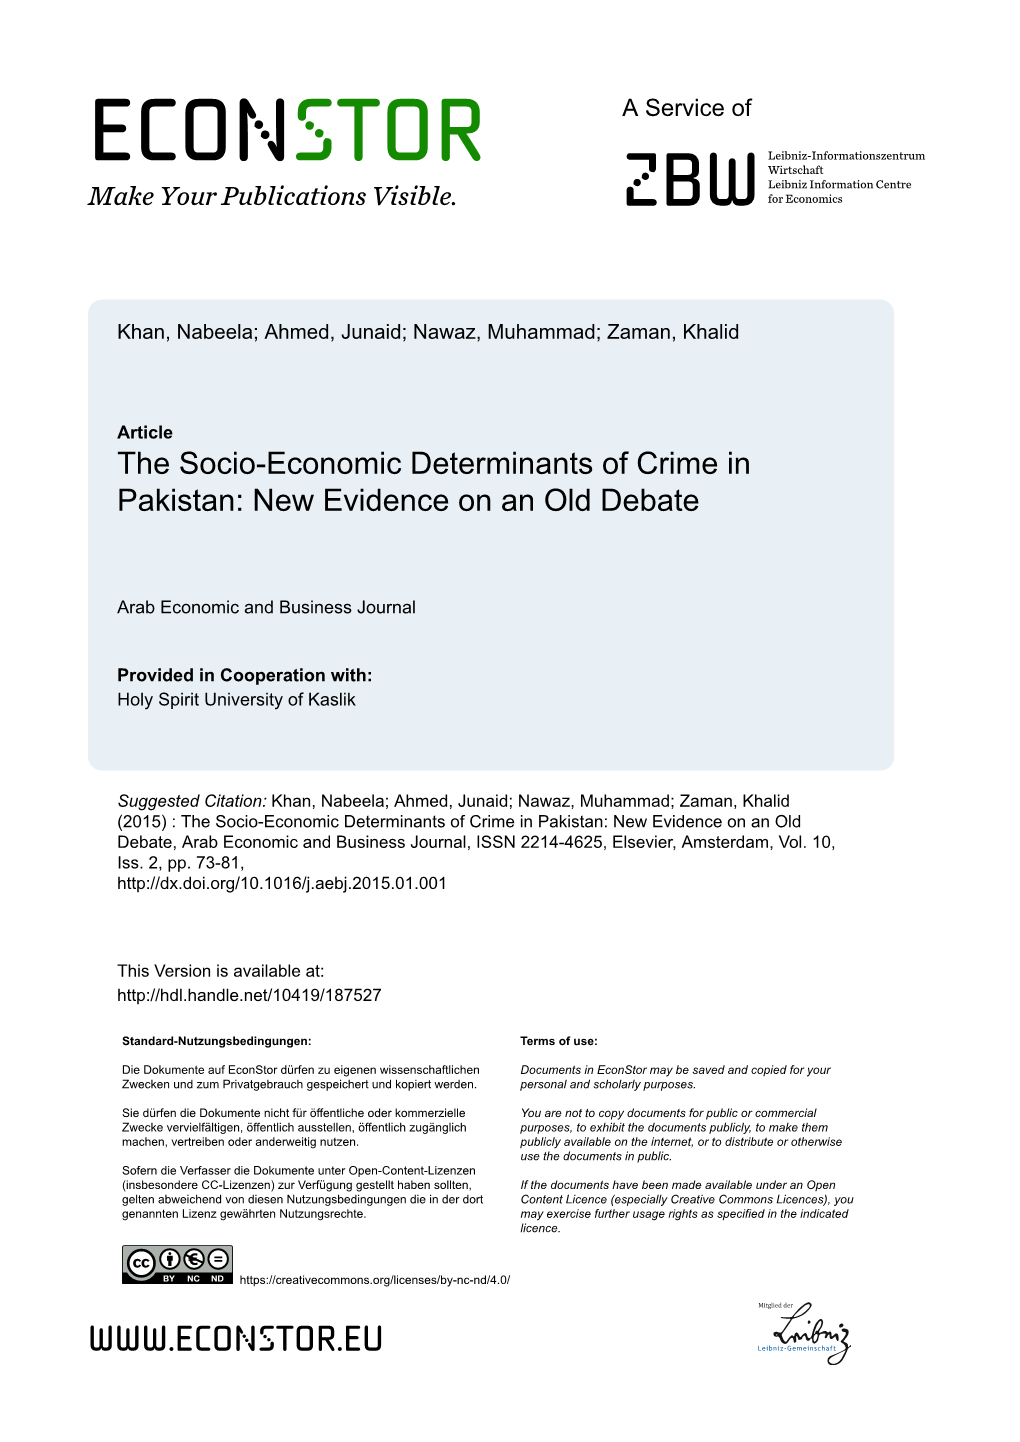 The Socio-Economic Determinants of Crime in Pakistan: New Evidence on an Old Debate